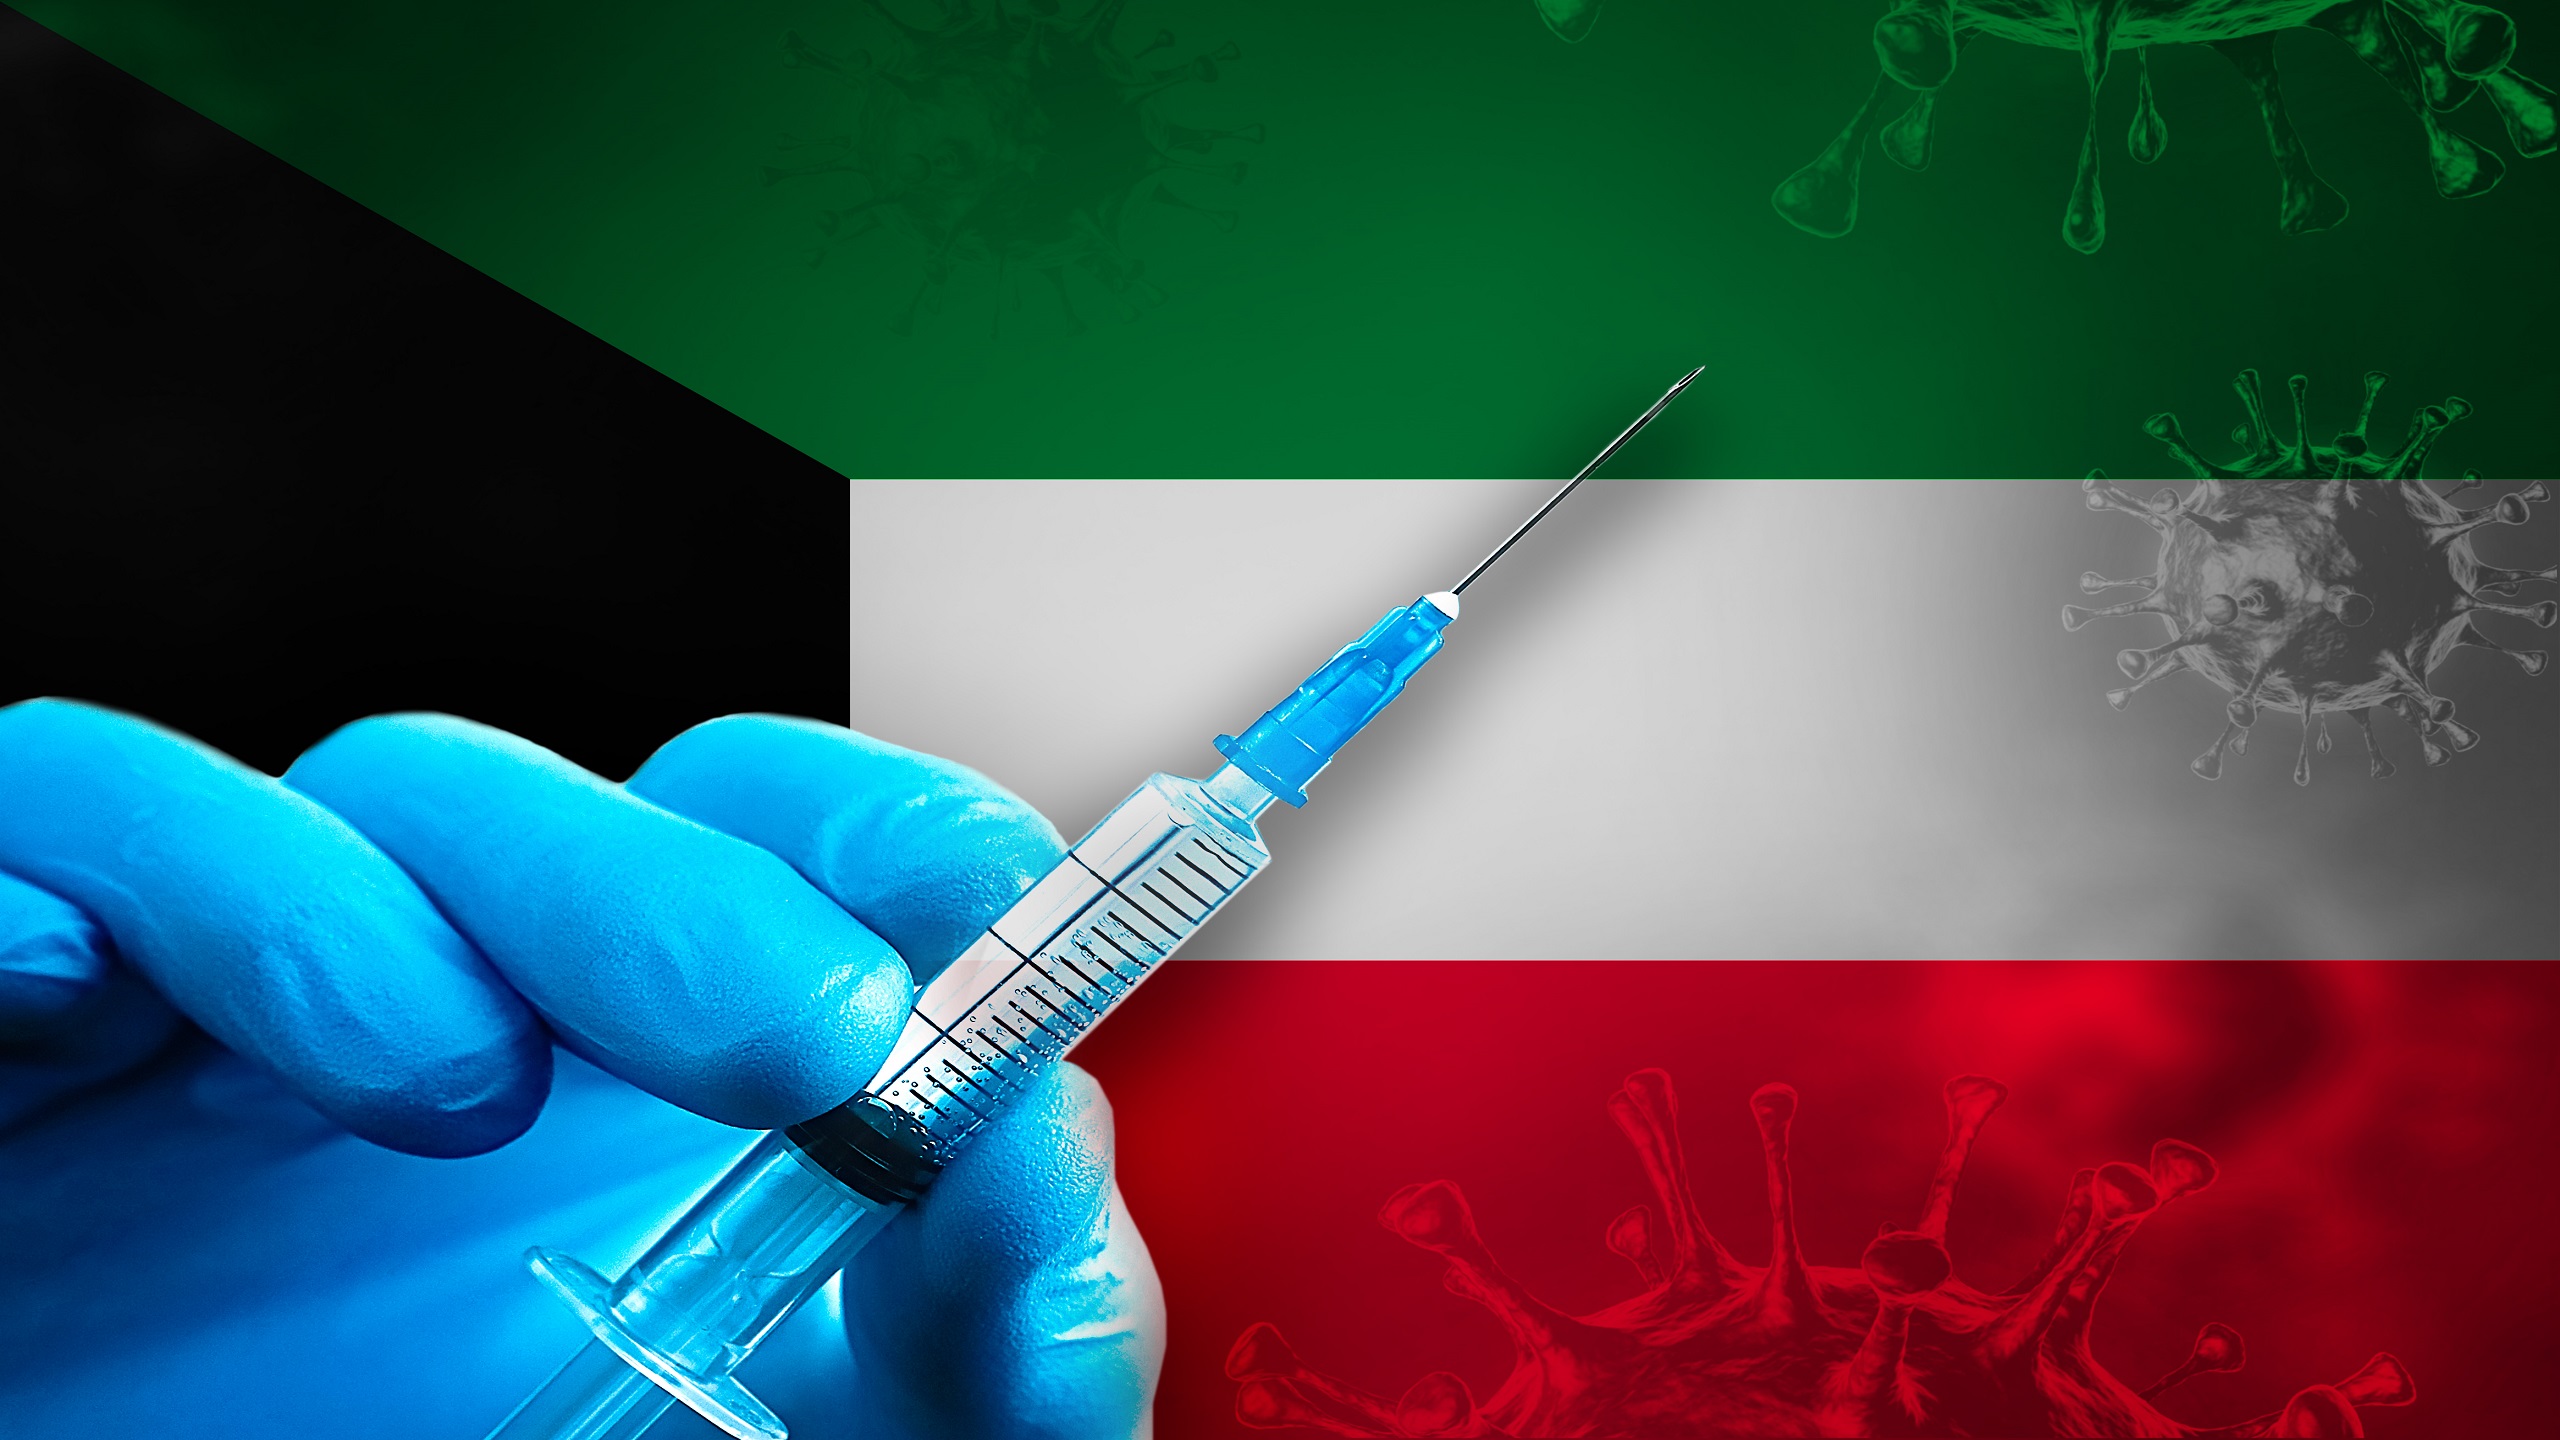 Kuwait Begins Vaccinating Children Ages 5-11 Against COVID-19